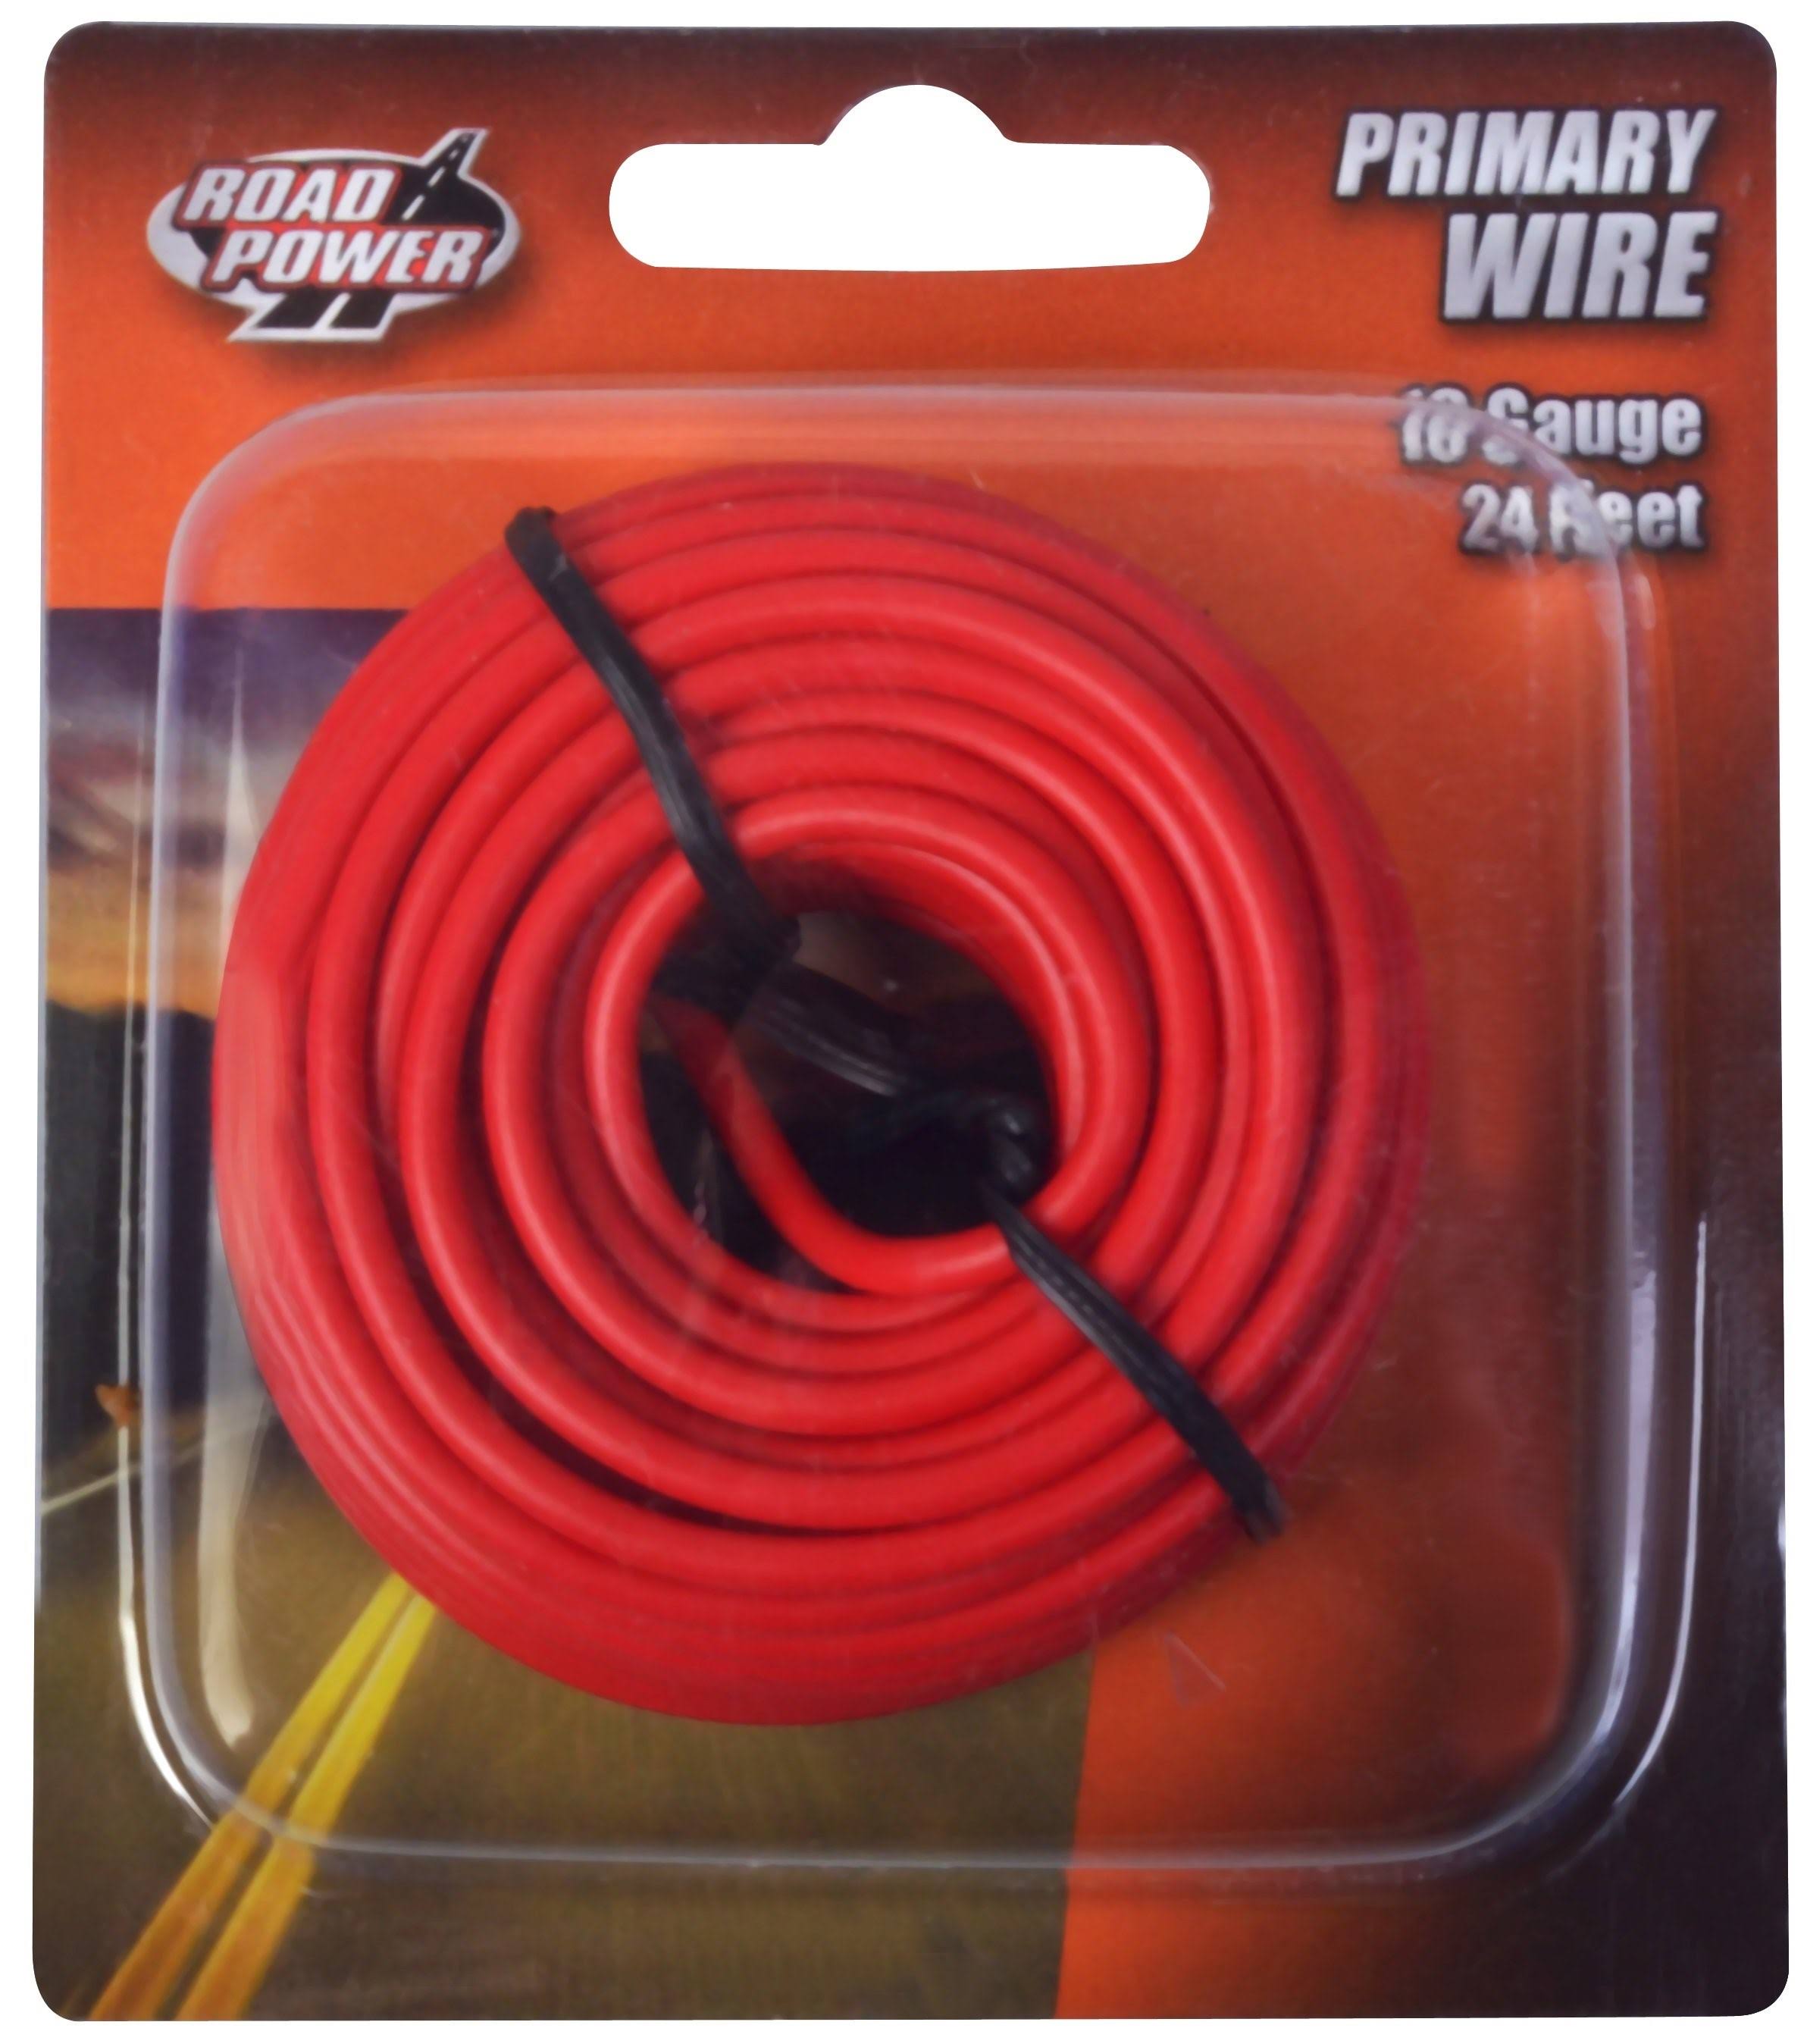 Coleman Cable Primary Wire - Red, 16 Gauge, 24'